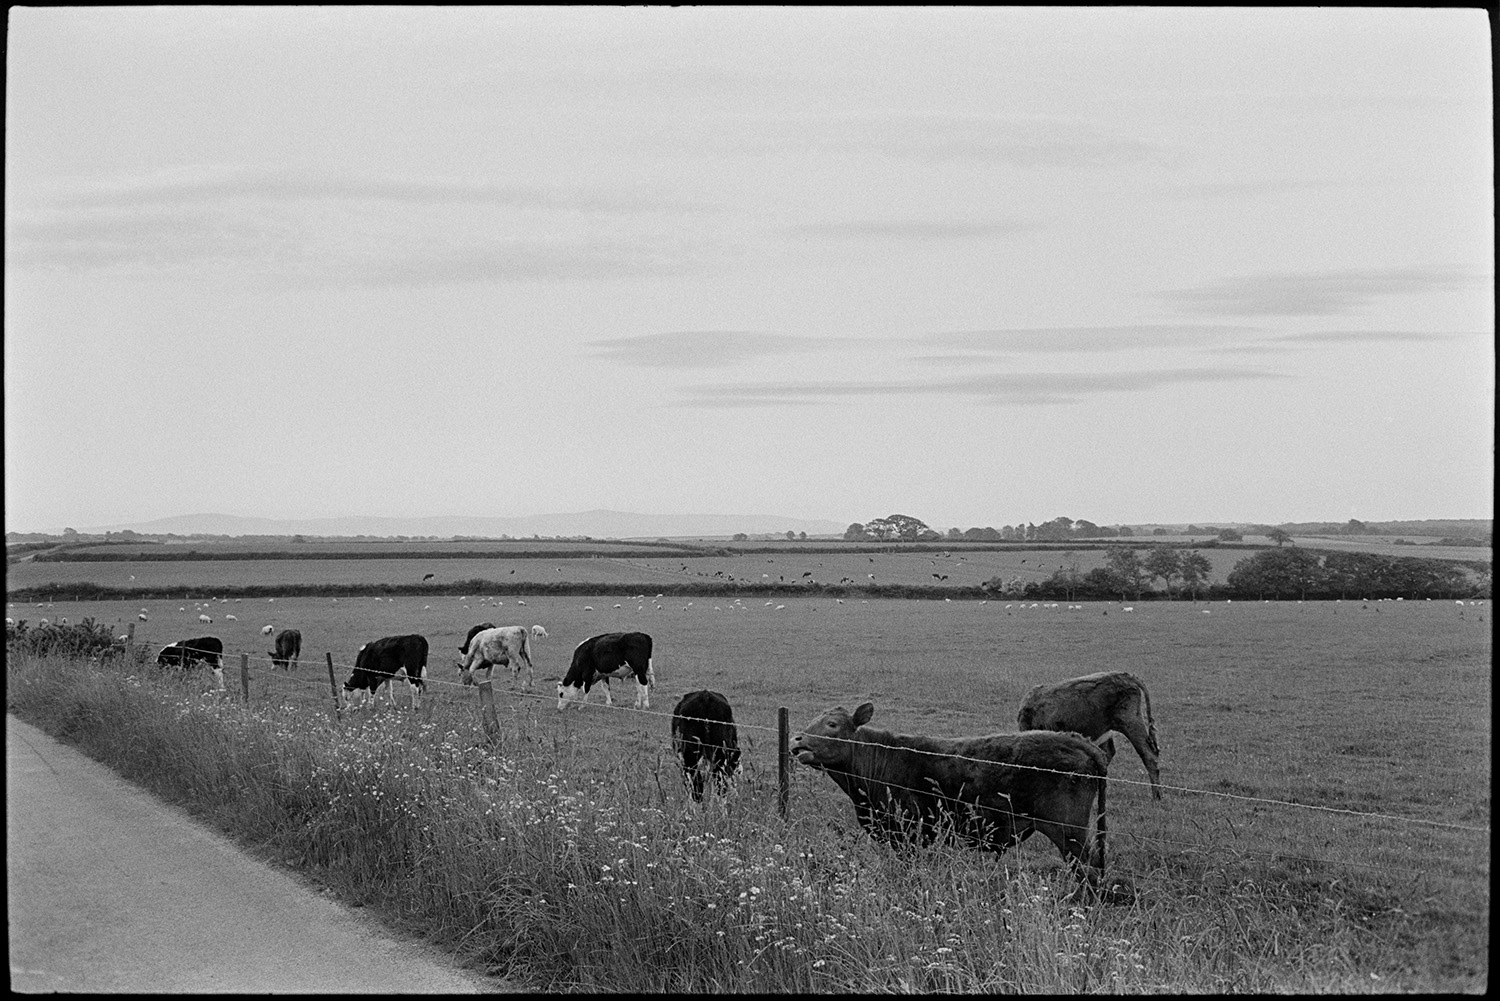 Cattle on moor.
[Cattle grazing in a field by the road side with wild flowers on the verge on Hollocombe Moor. More grazing livestock, fields and trees can be seen in the background.]